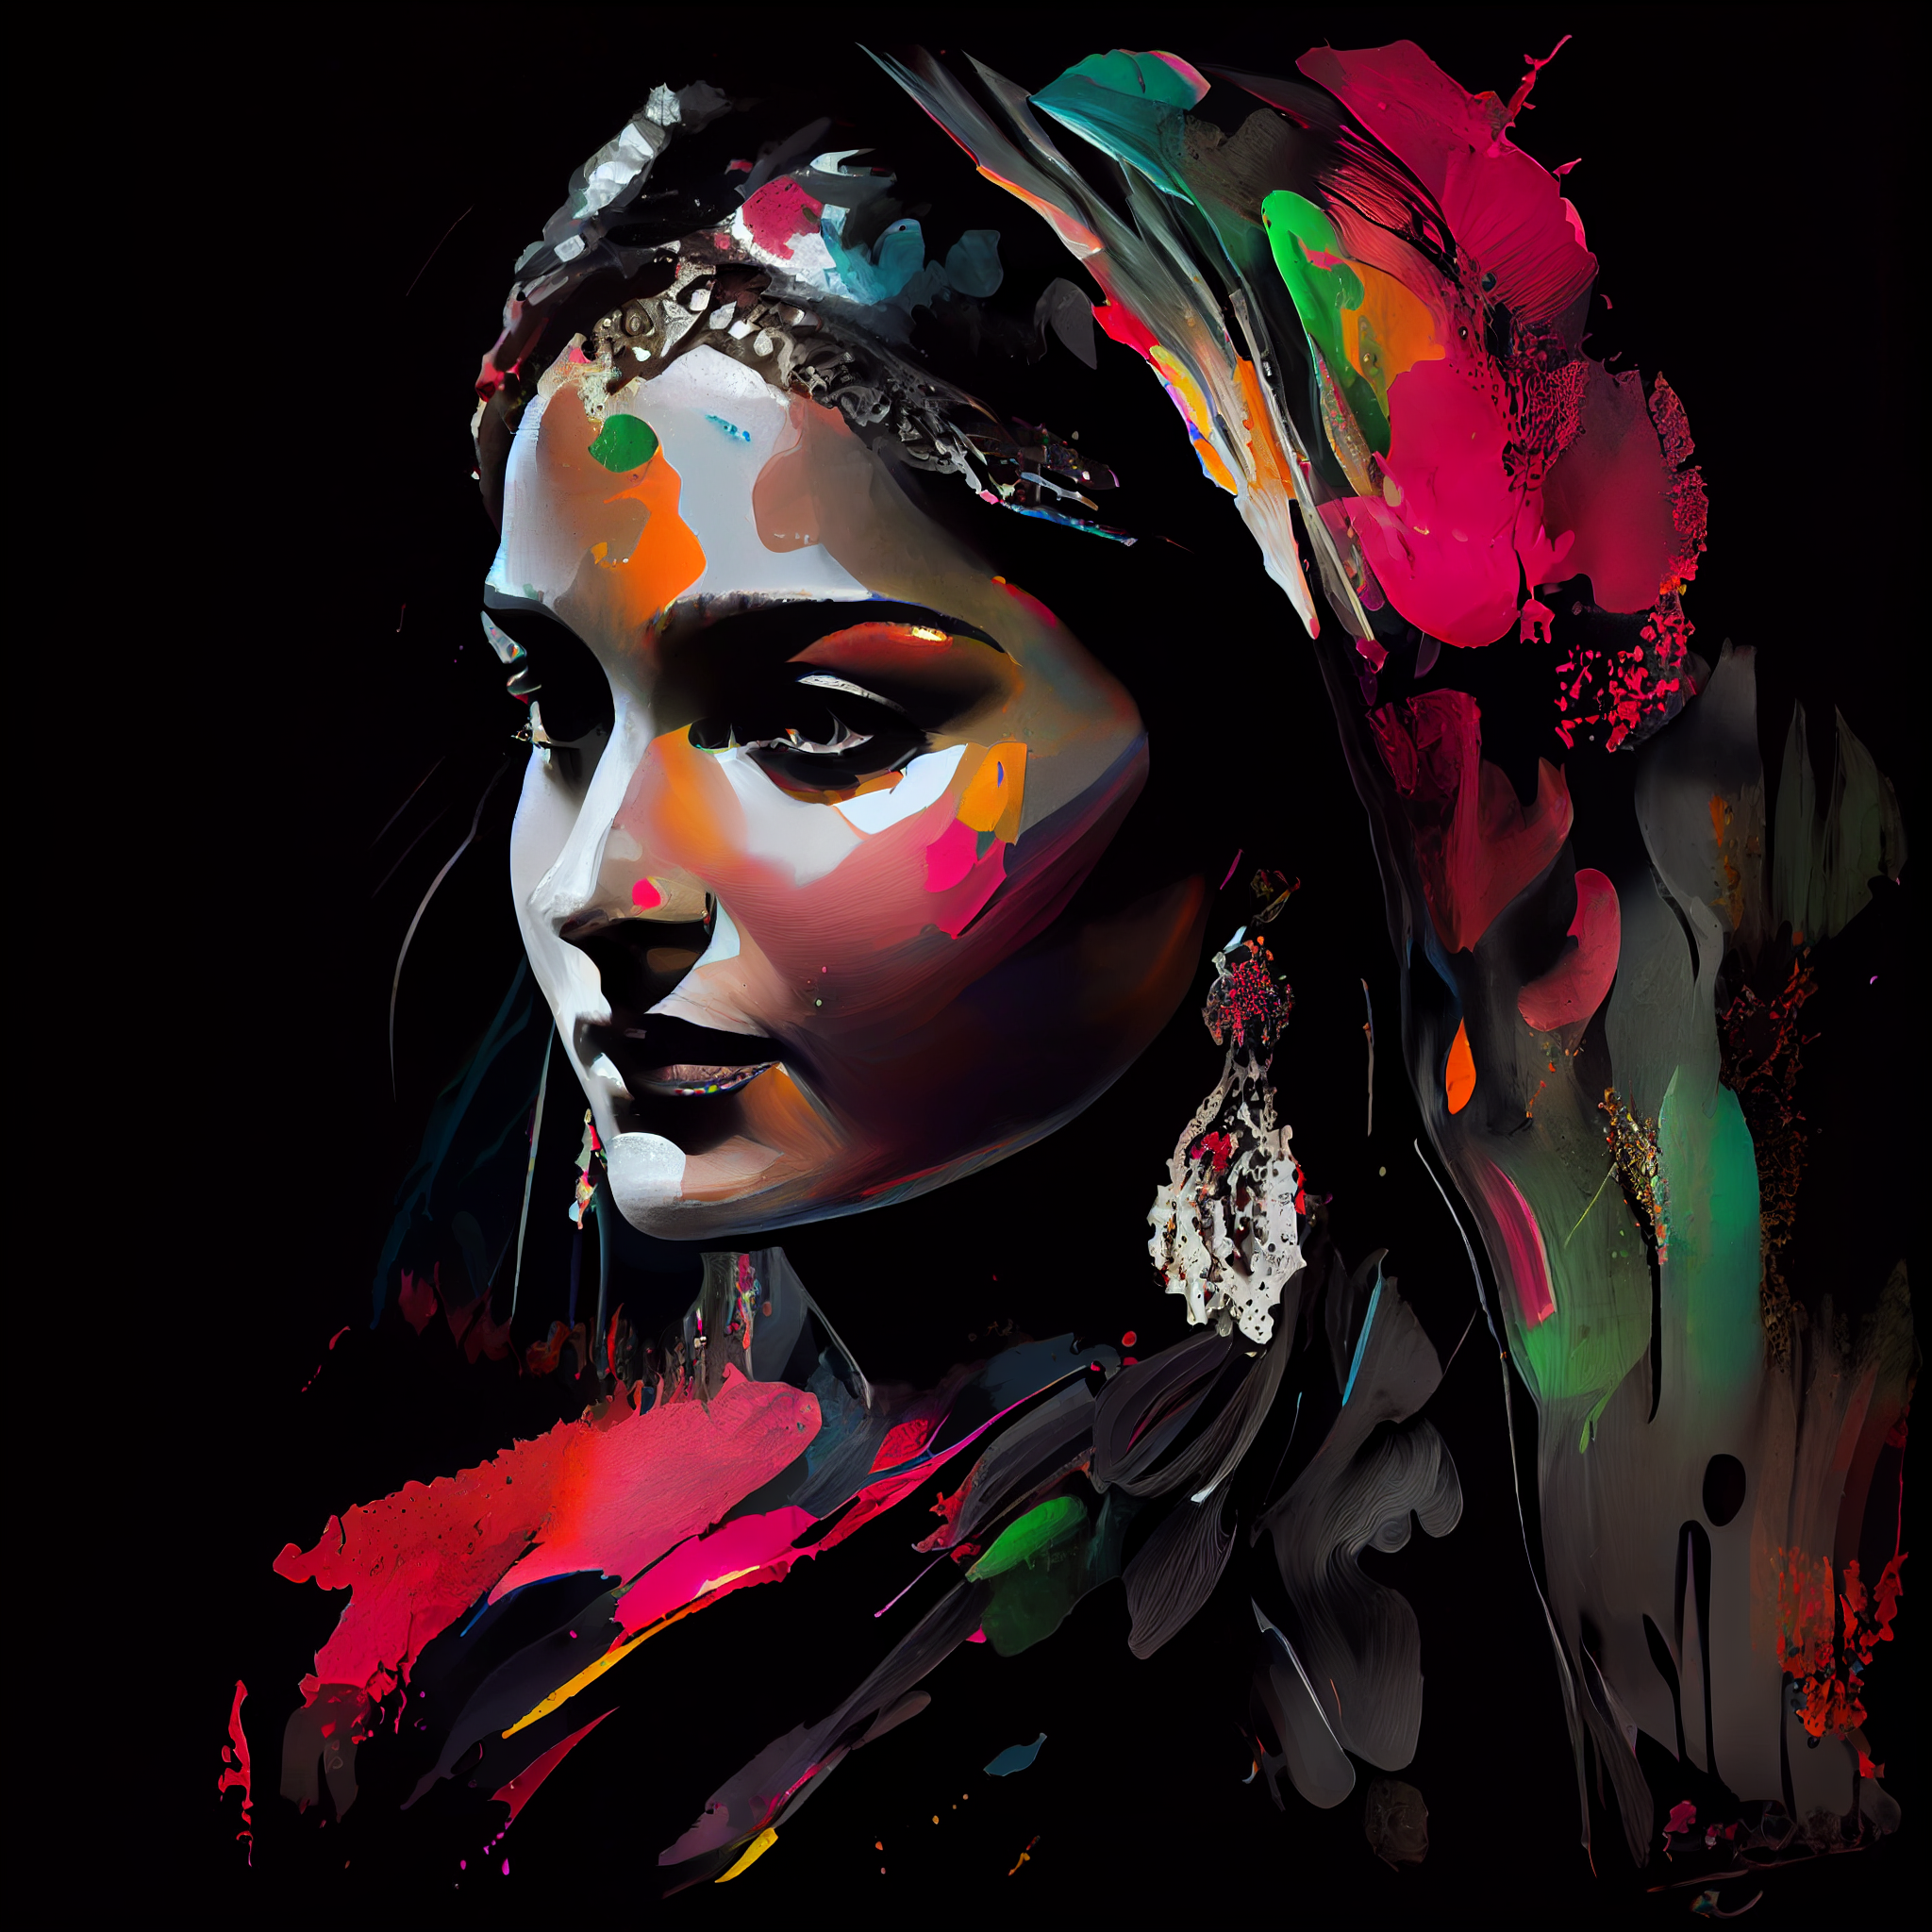 Capture the Divine Love of Radha Rani with Our Stunning Oil Art Print